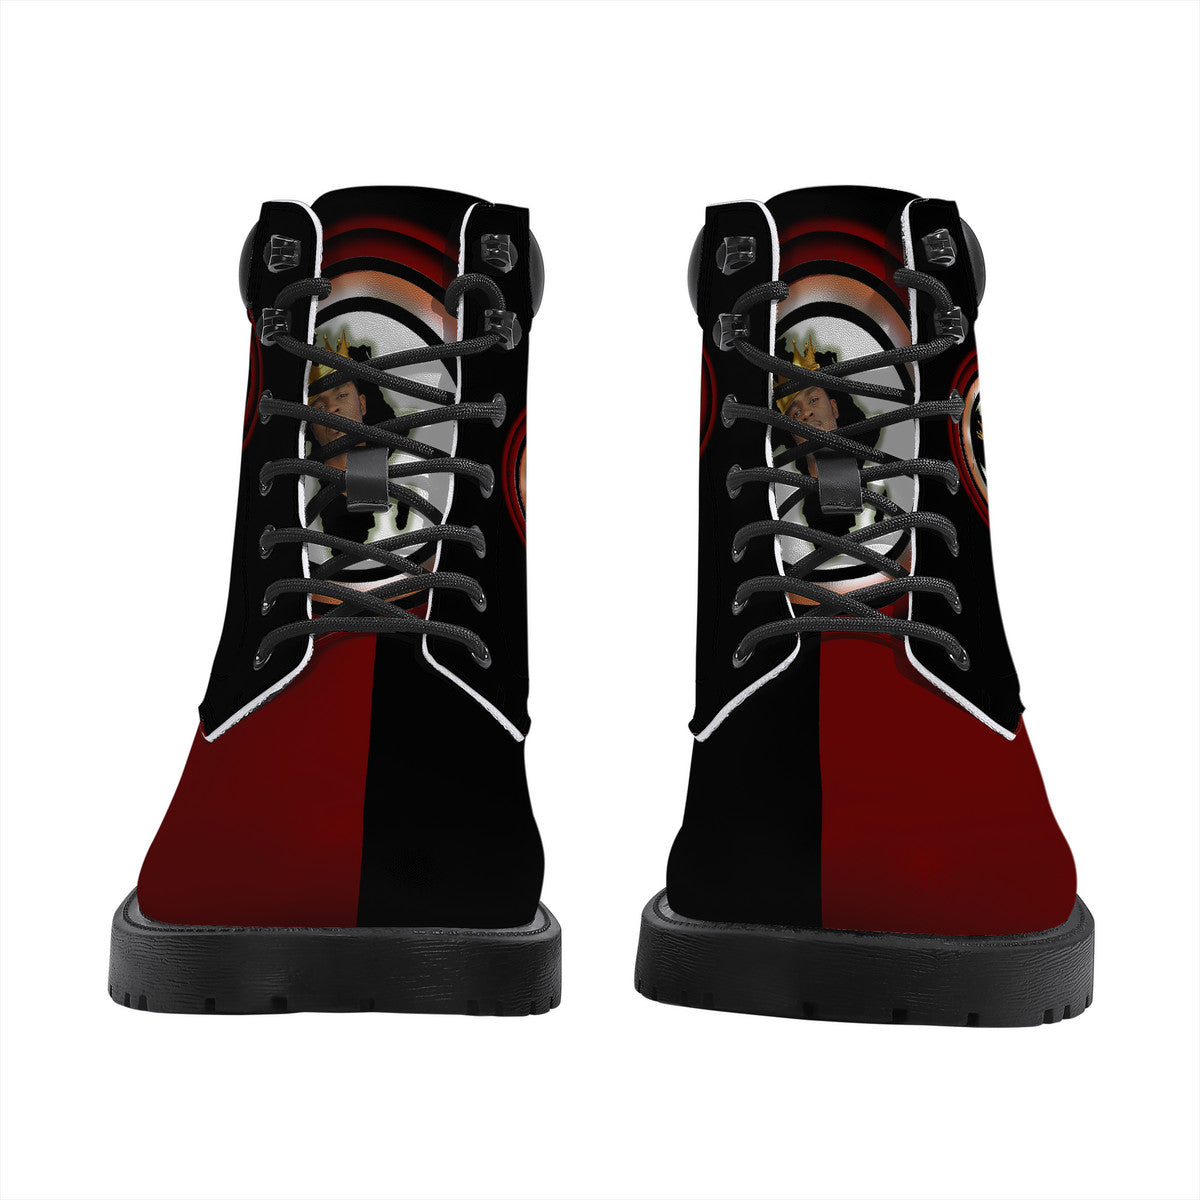 Grand-Rising Red Construction Boots